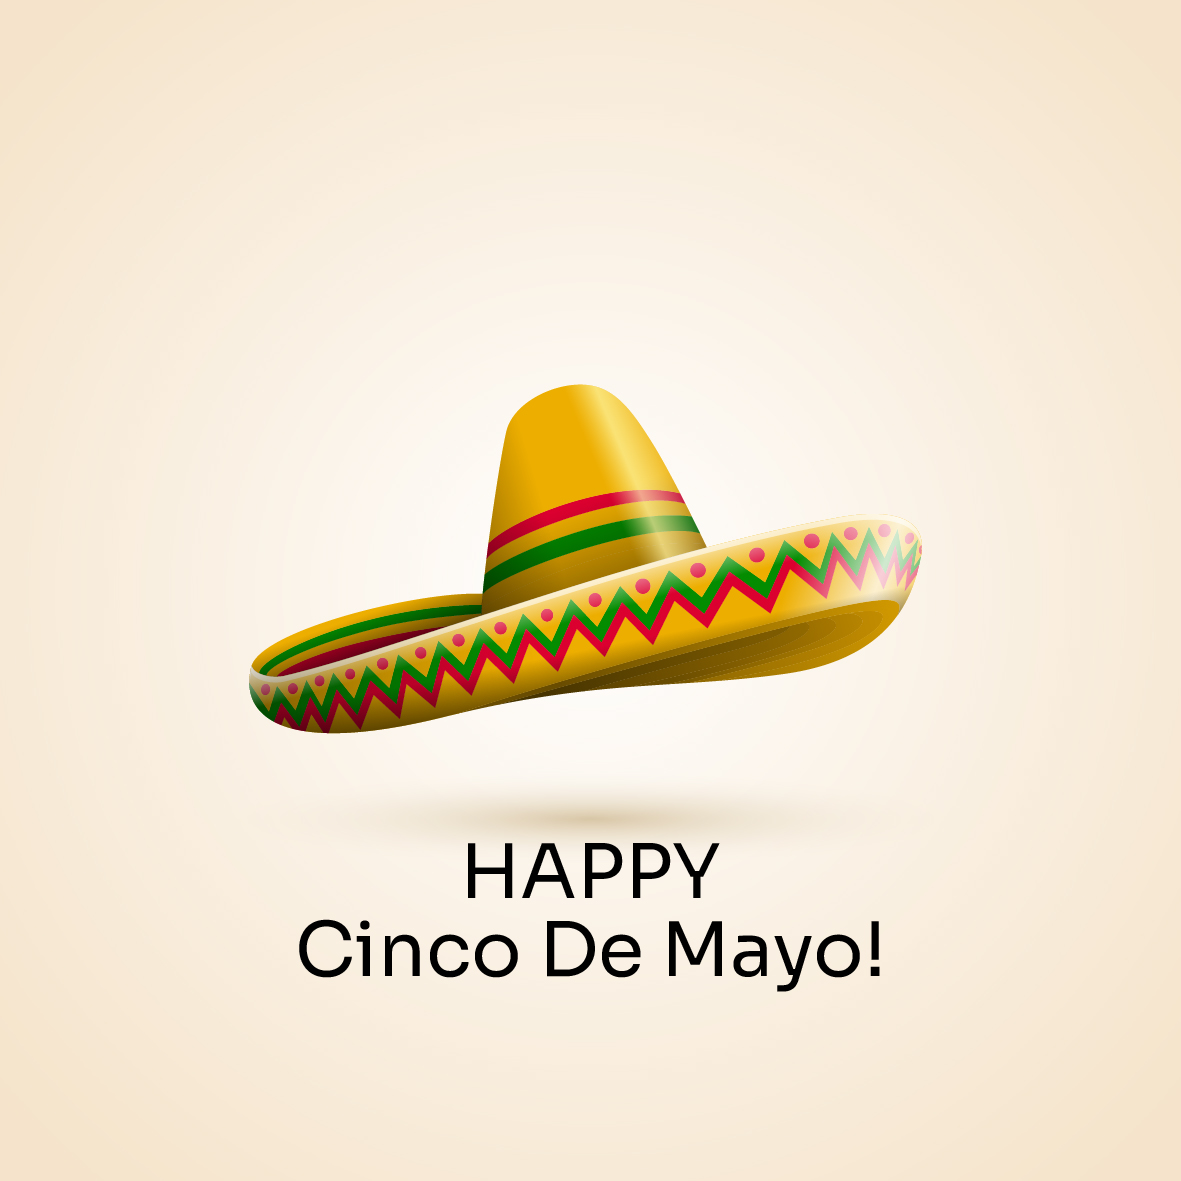 Happy #CincoDeMayo from Hawx Pest Control! Today, let's celebrate Mexican heritage and culture while keeping pests at bay. ¡Viva México!'  #PestControl #CelebrateSafely